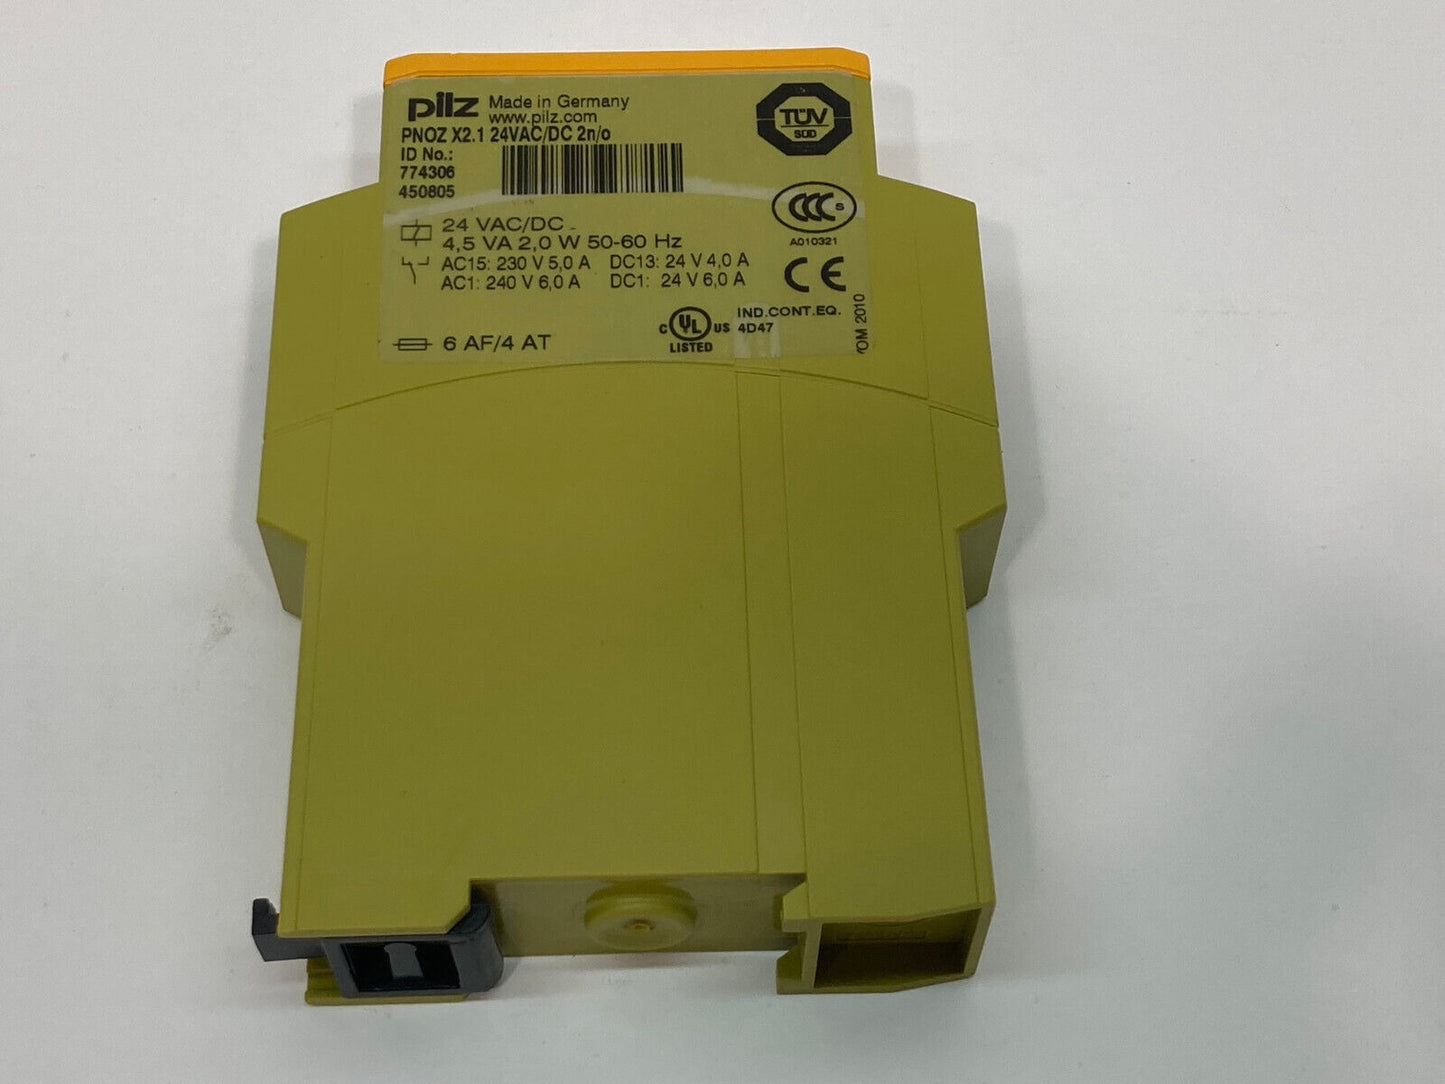 PILZ PNOZx2.1 Ident No. 774306 24VAC/DC 2n/o Safety Relay